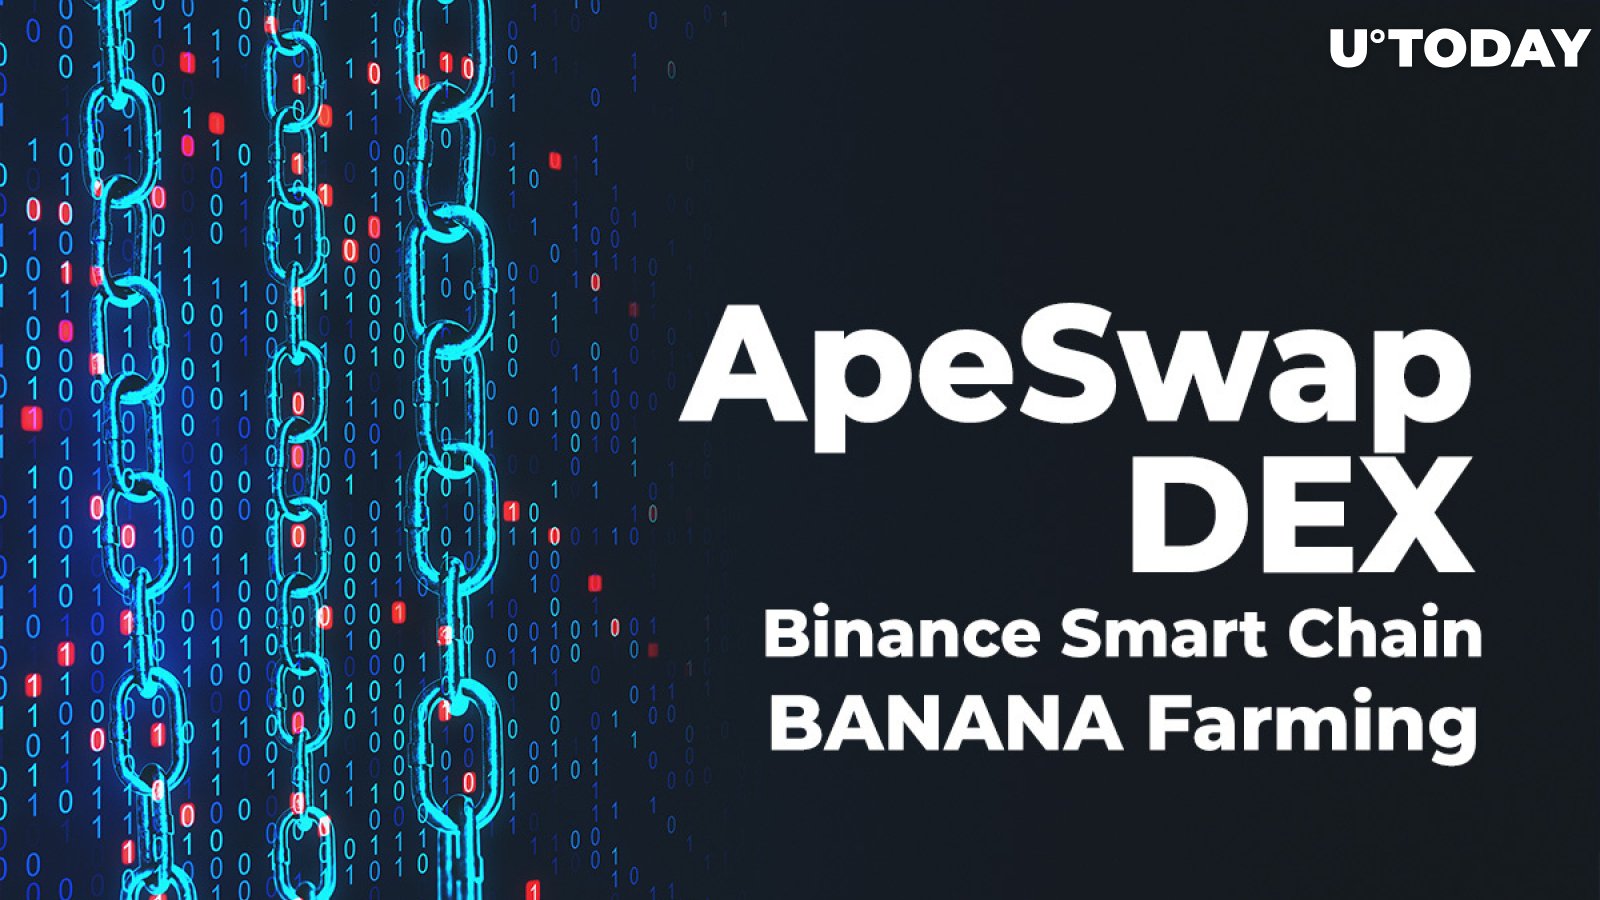 ApeSwap DEX Launched on Binance Smart Chain, Introduces BANANA Farming